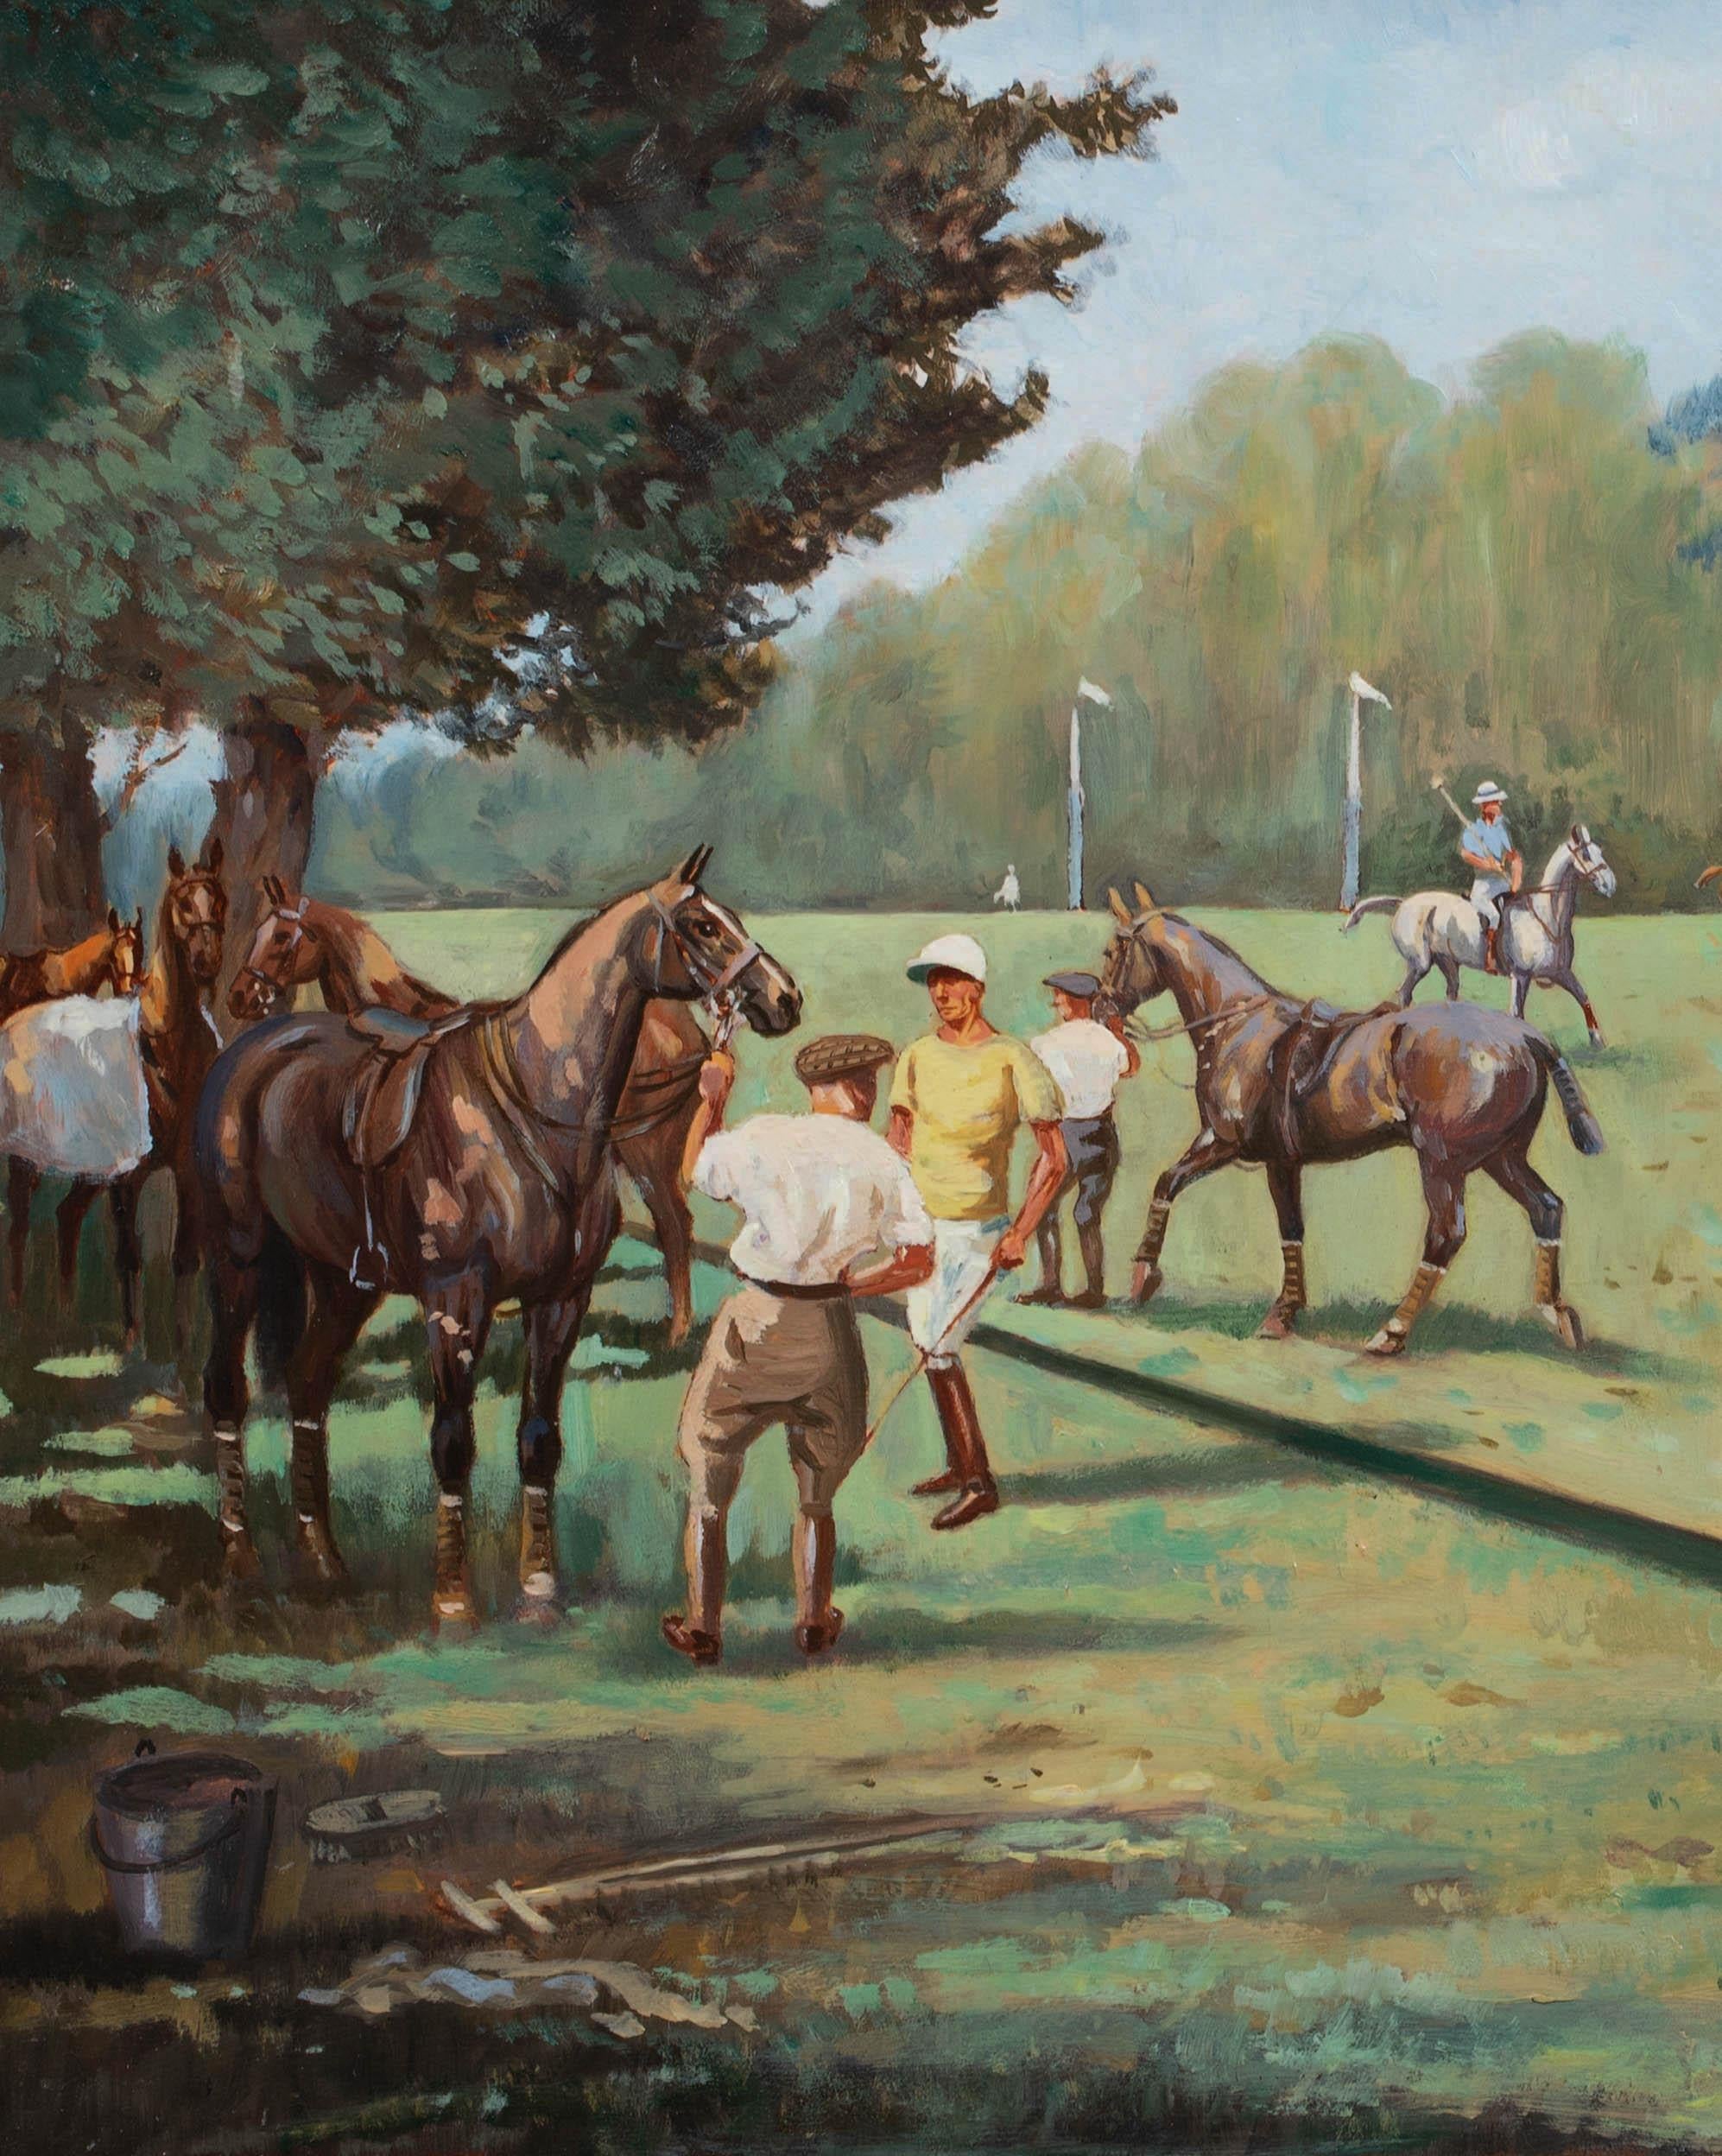 The Polo Match, date 1957 - Brown Landscape Painting by Fernando Manetti